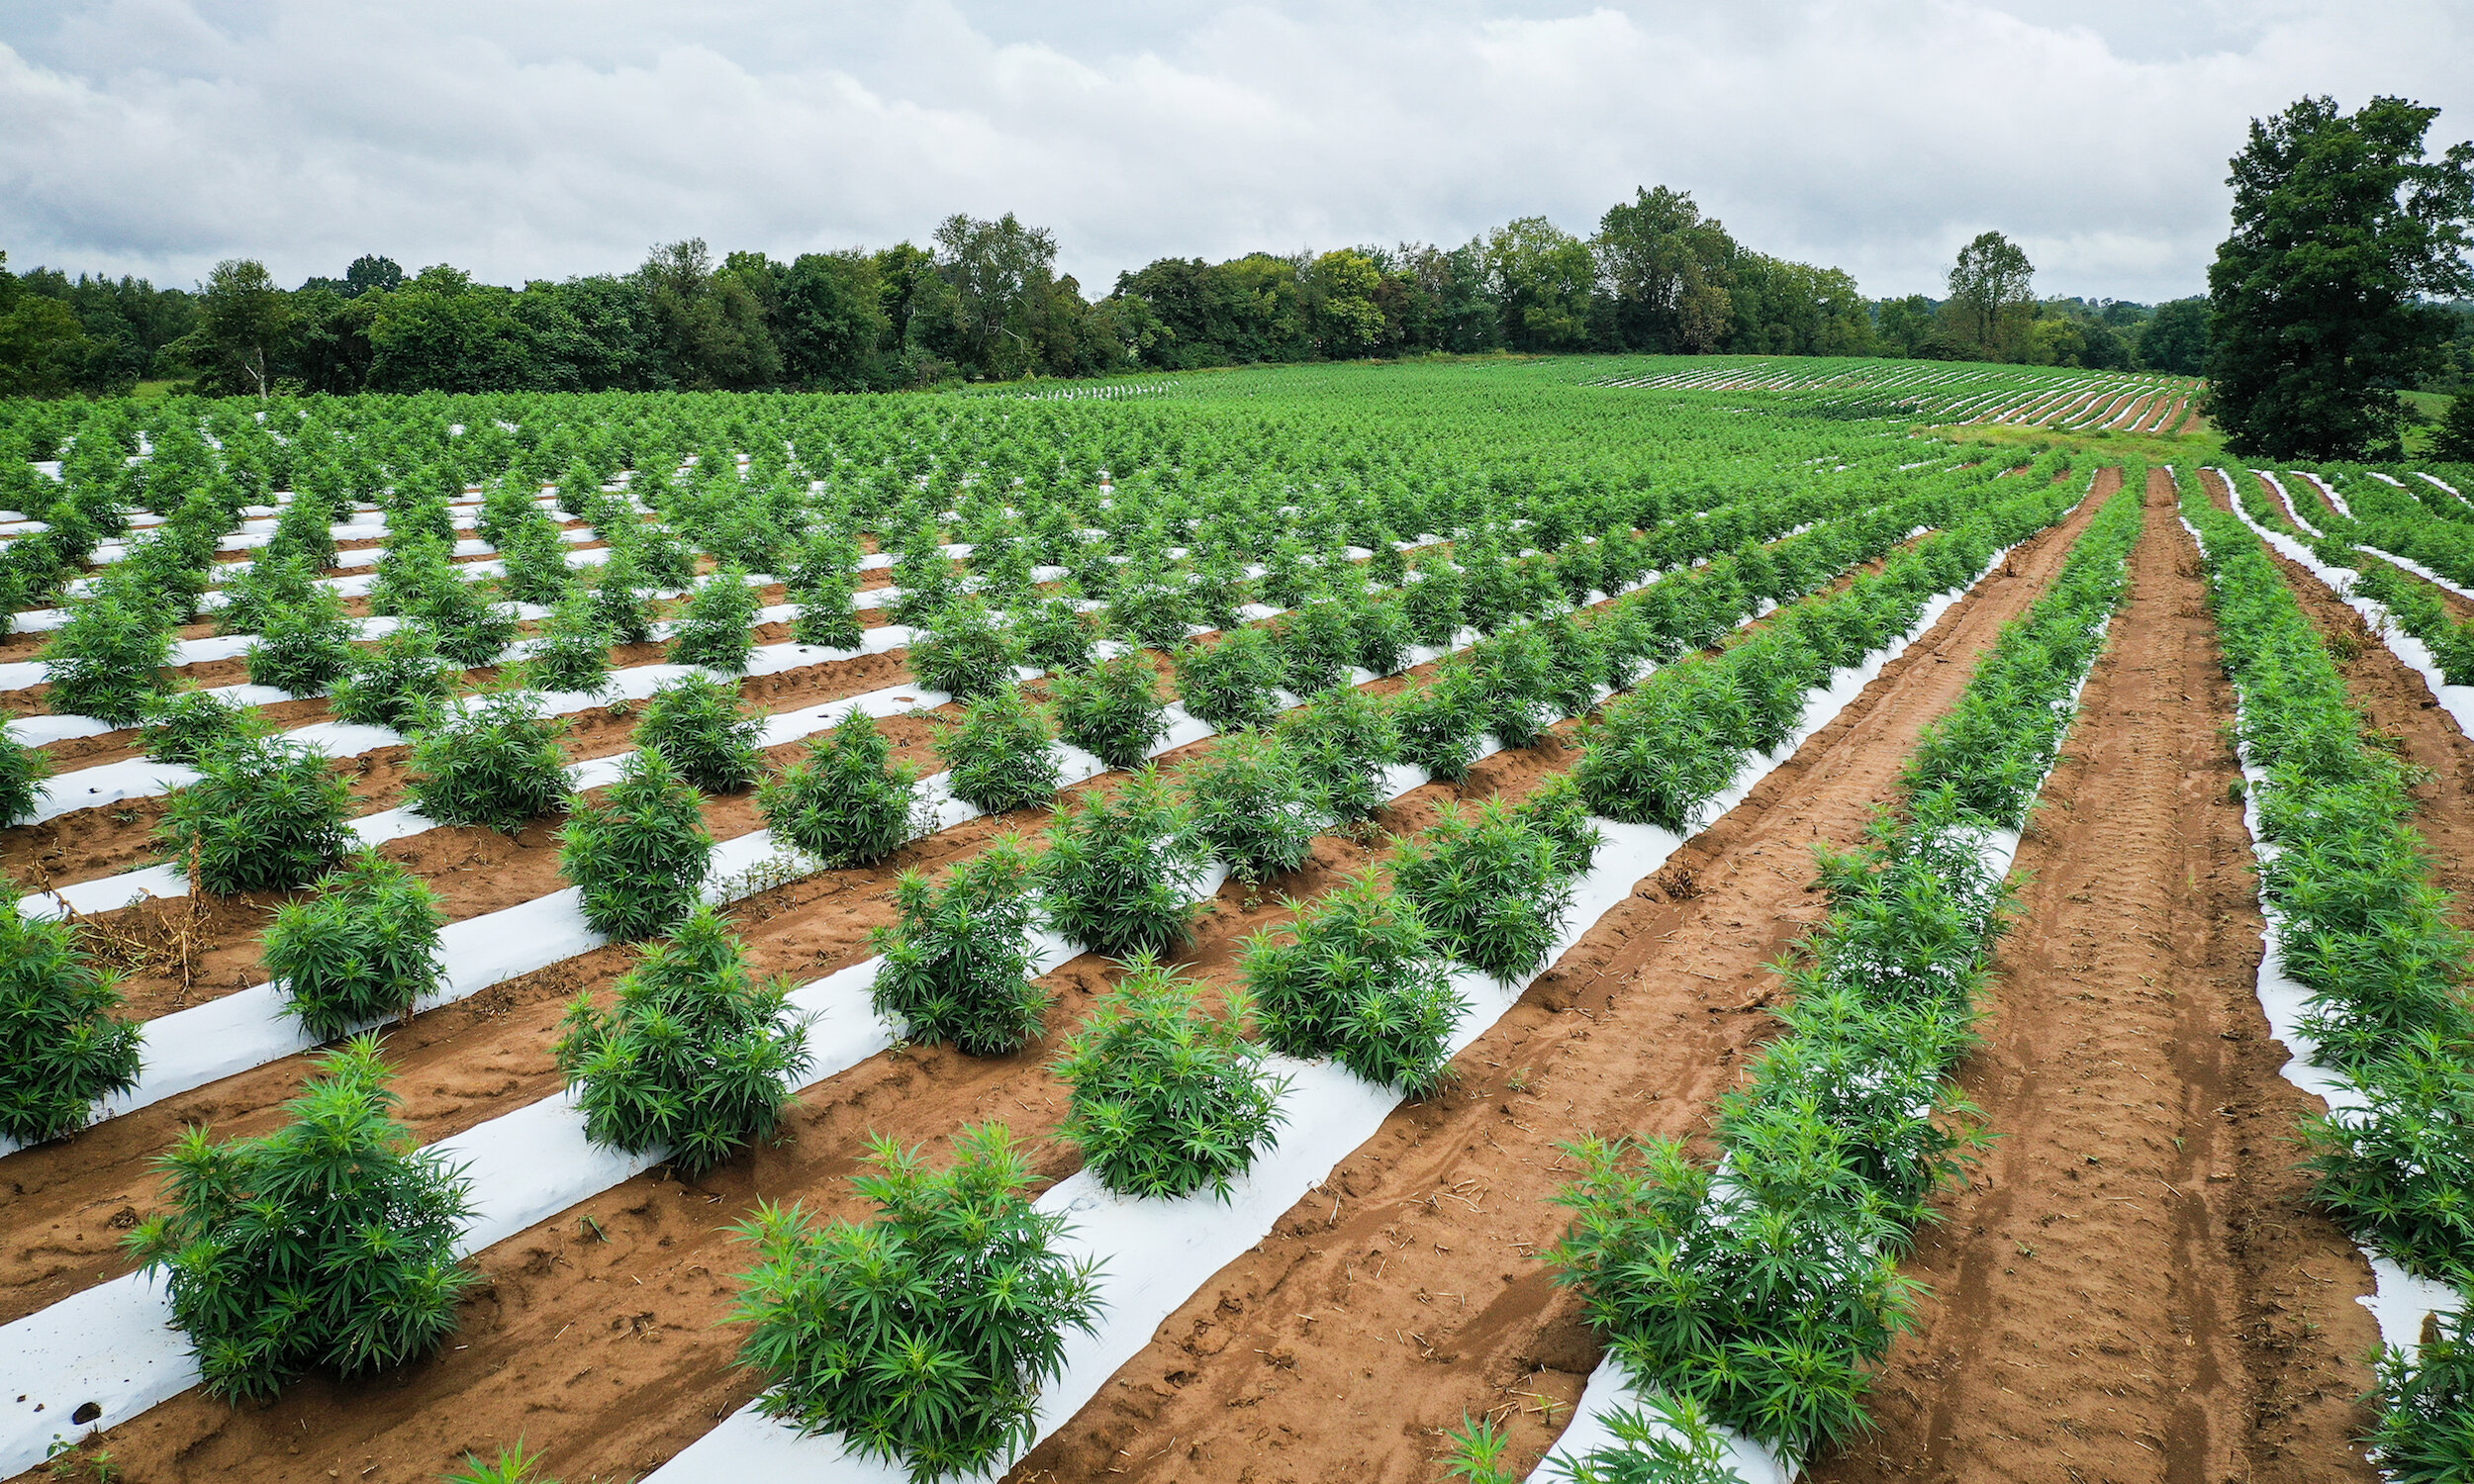 Maryland Hemp Farmers Come Out in Opposition to Buffer Bill